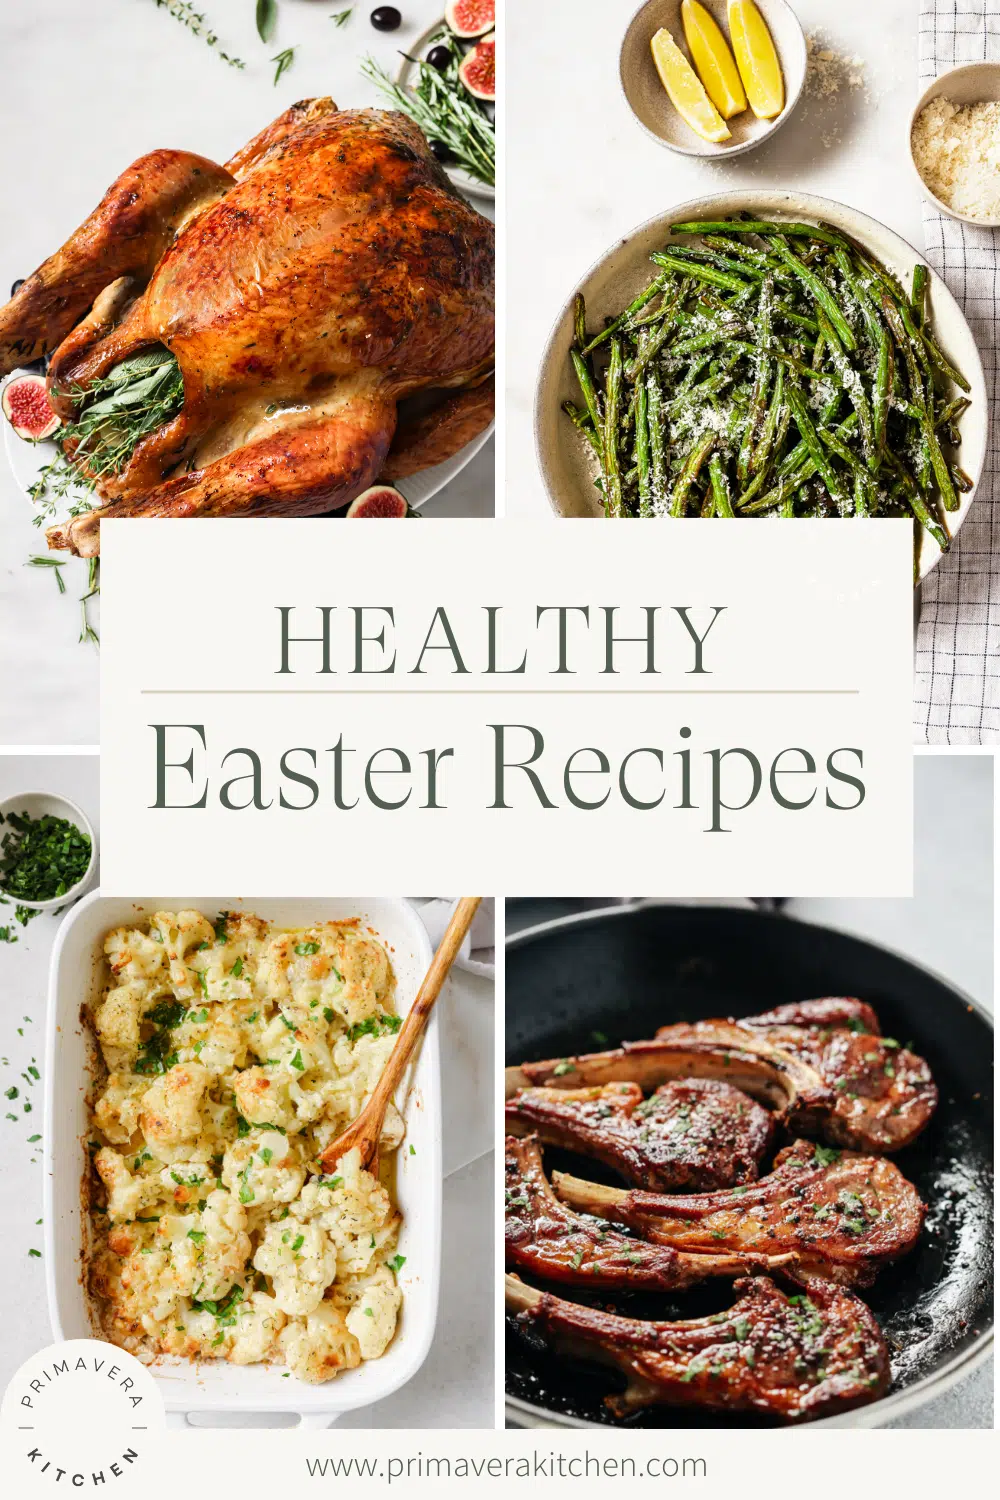 Titled Photo Collage (and shown): Heathy Easter Recipes